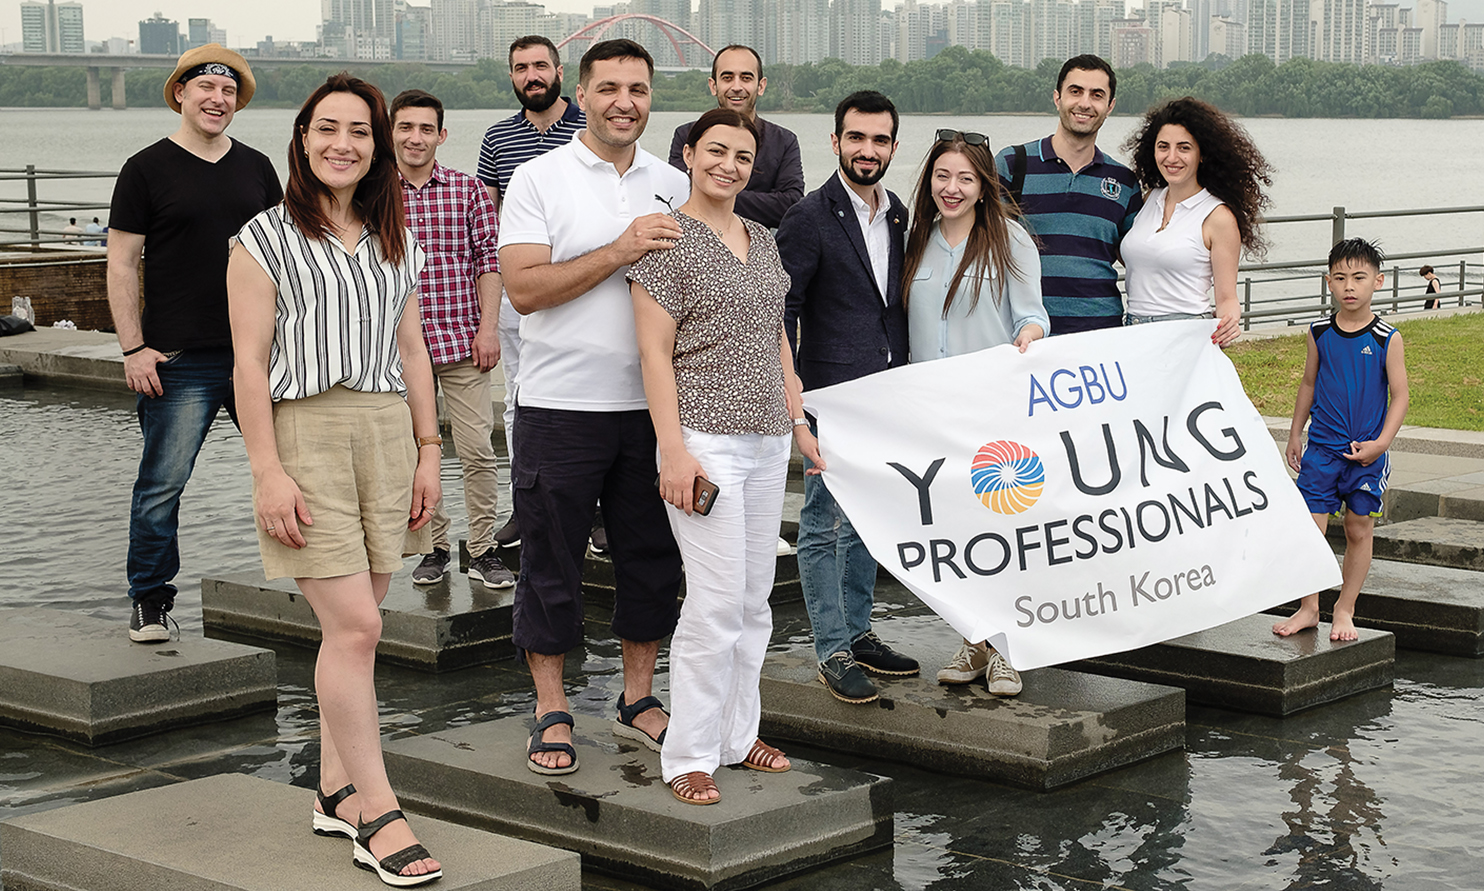 Young Professionals community in South Korea